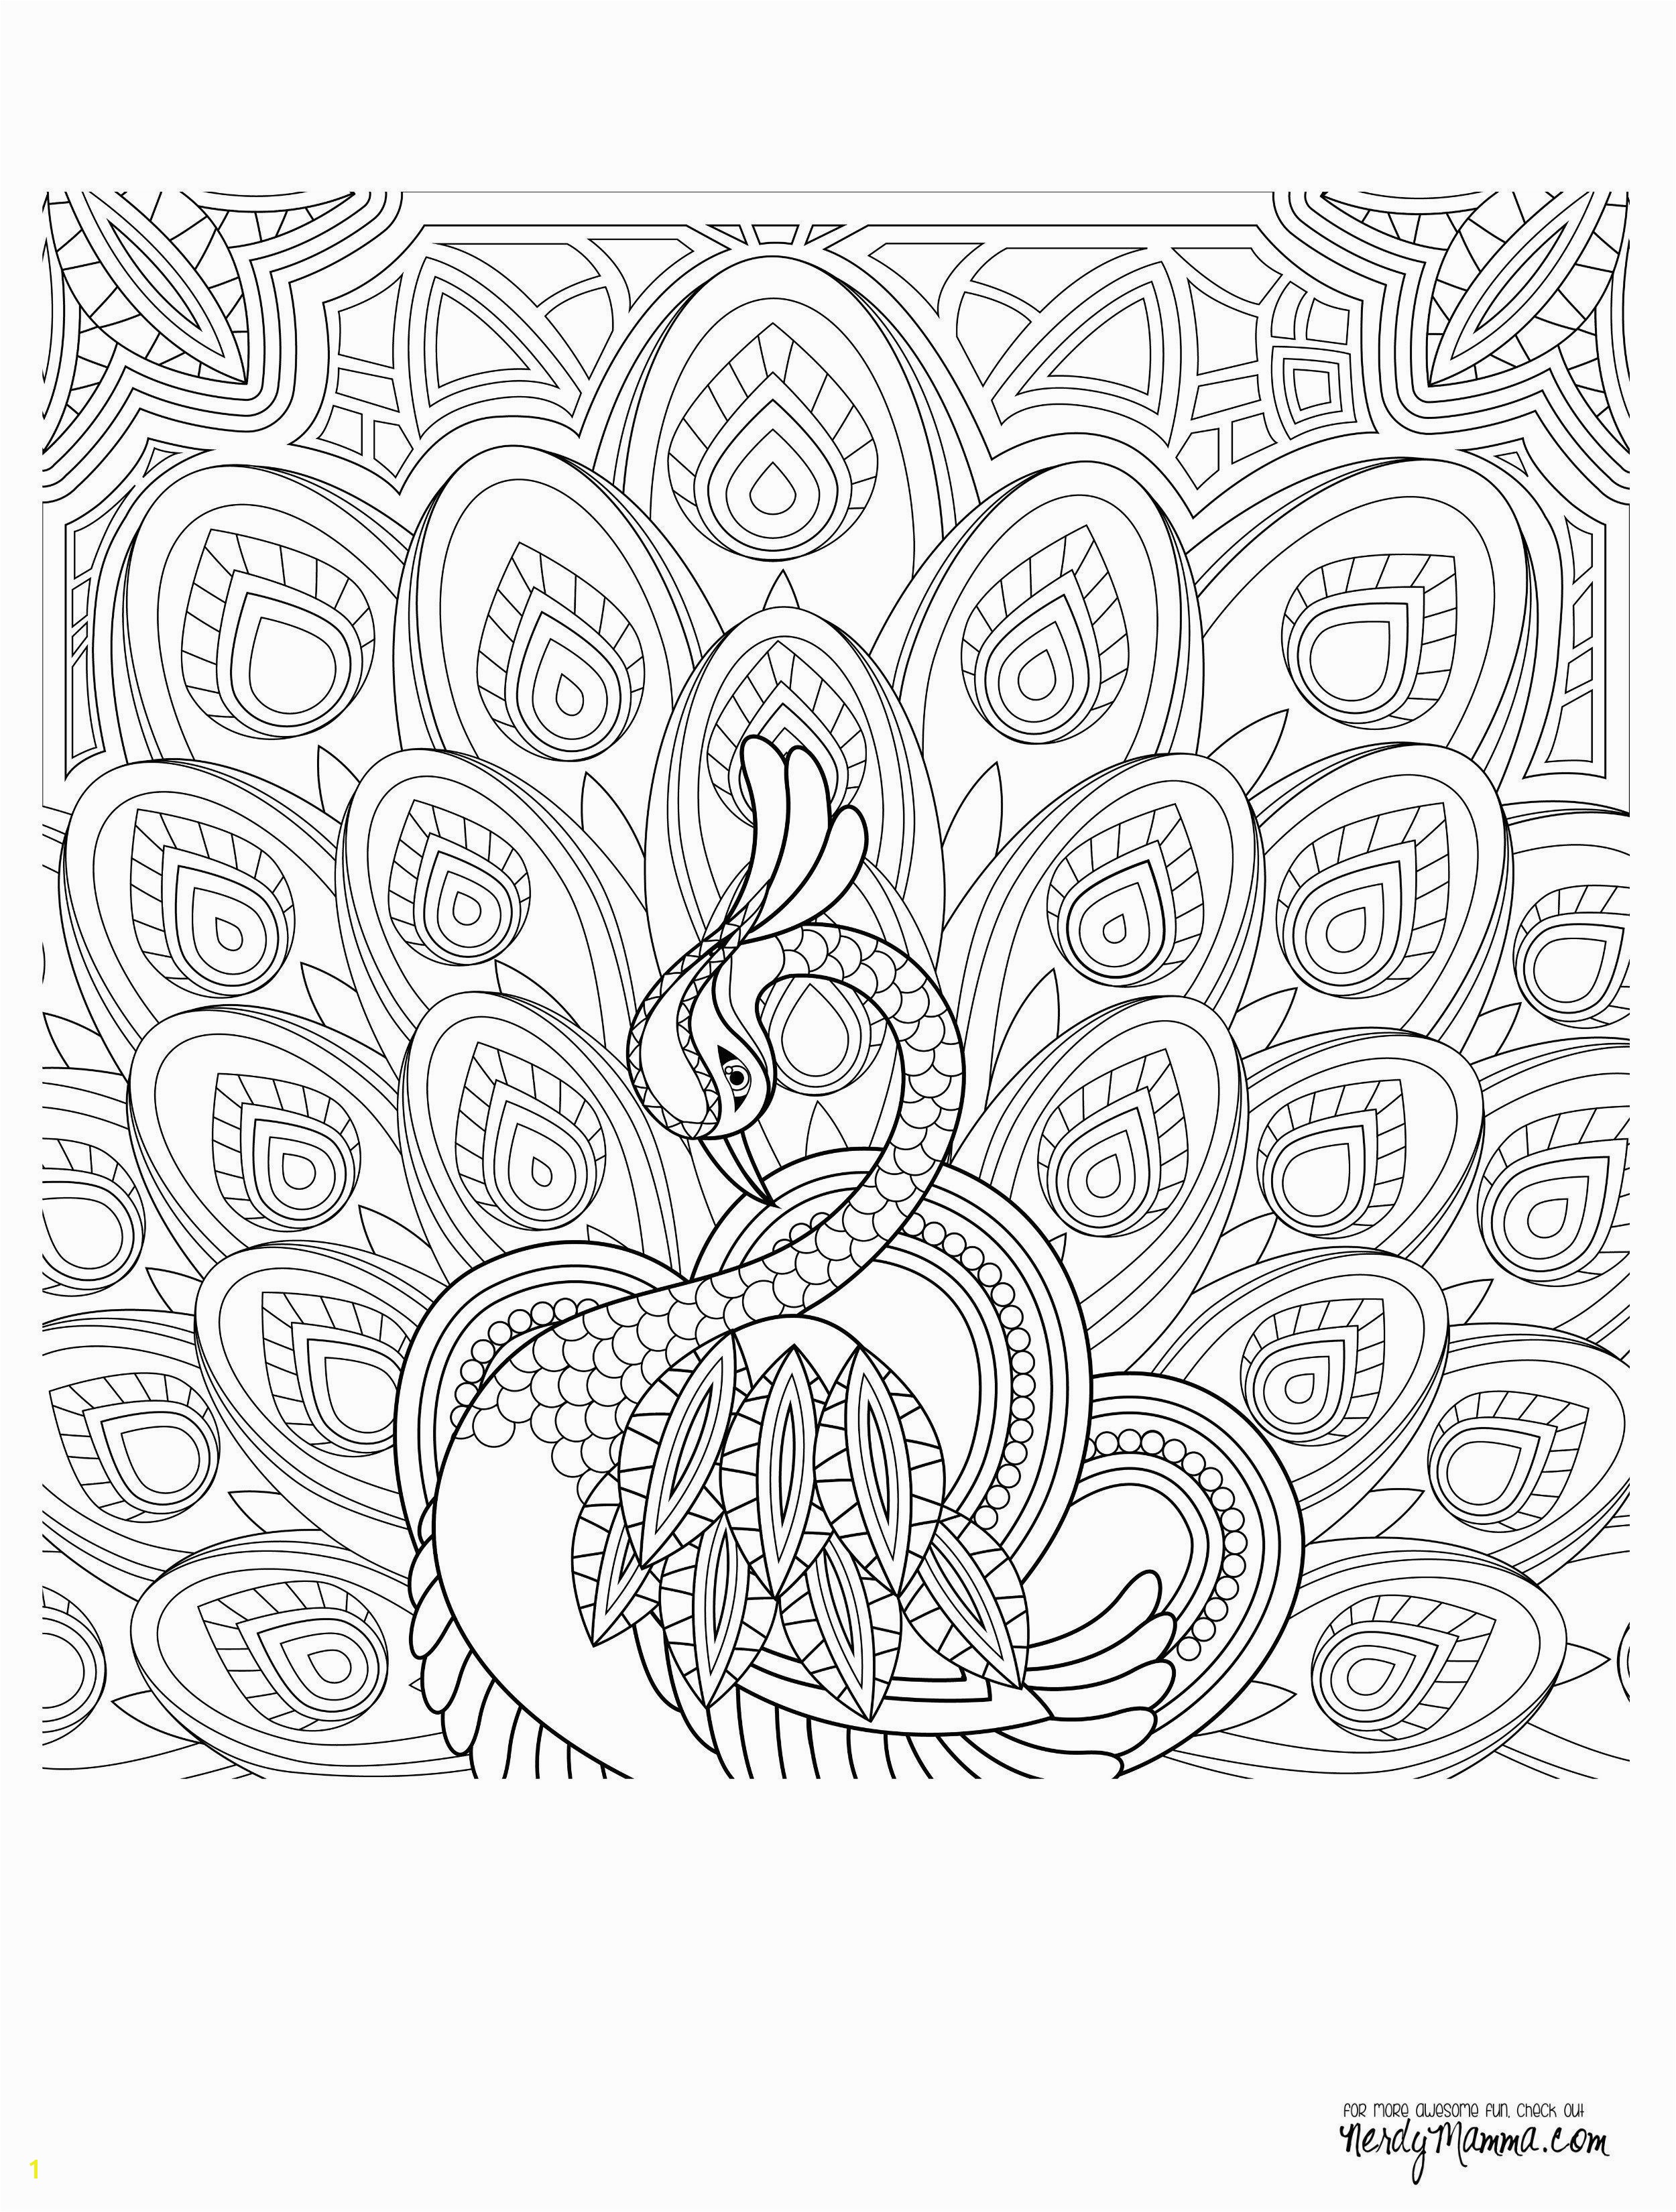 Free Coloring Pages Halloween Halloween Coloring Pages Printable Free Coloring Halloween Coloring